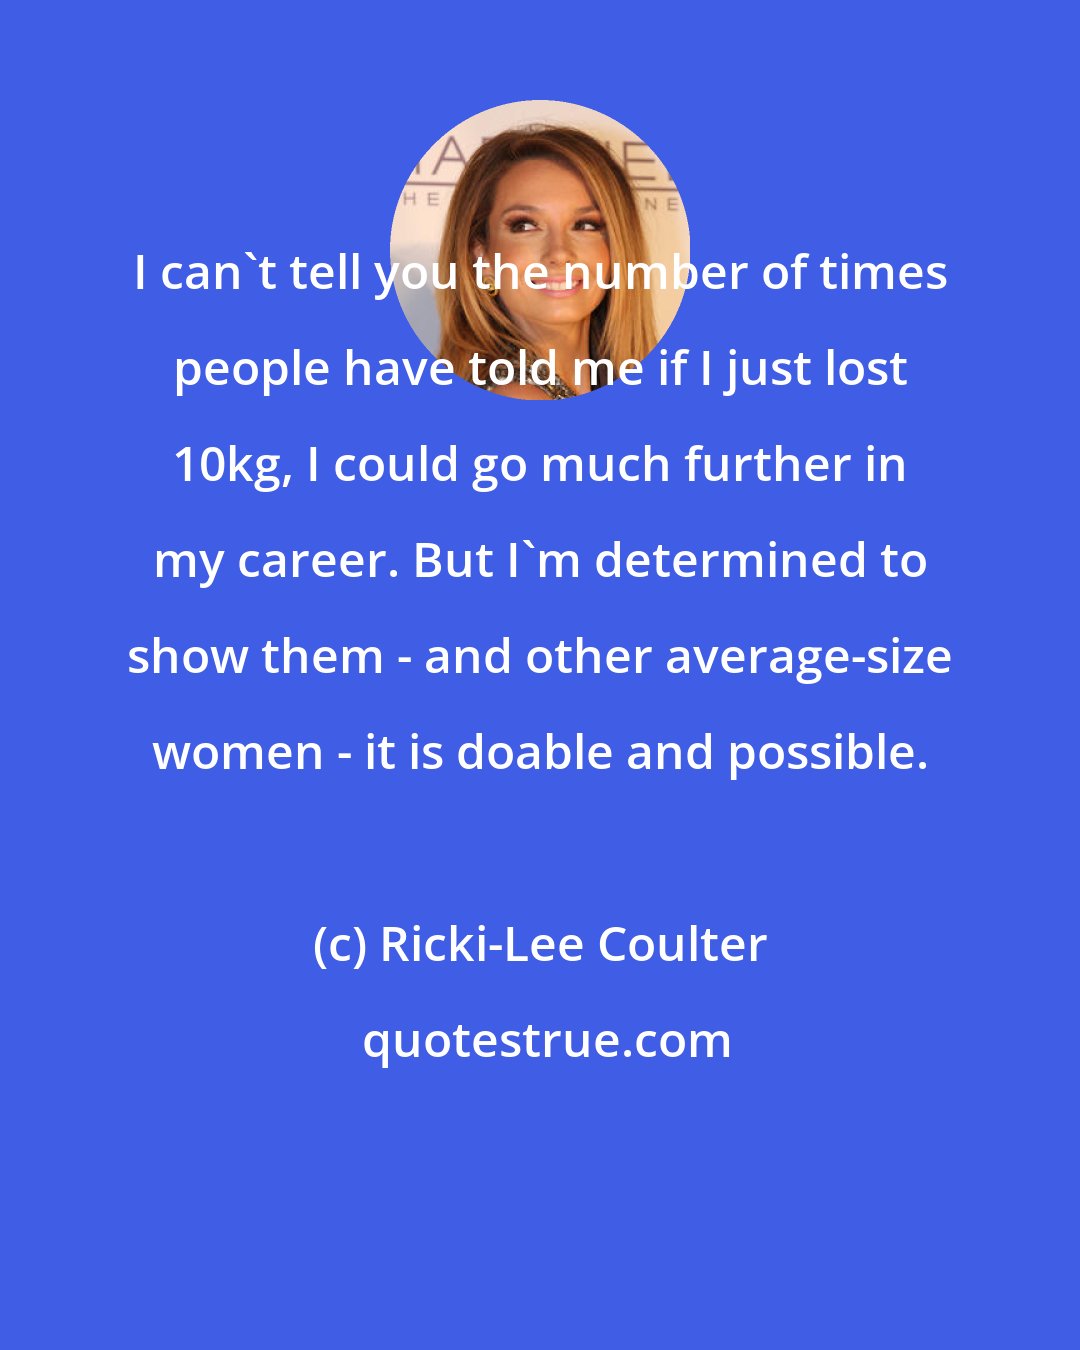 Ricki-Lee Coulter: I can't tell you the number of times people have told me if I just lost 10kg, I could go much further in my career. But I'm determined to show them - and other average-size women - it is doable and possible.